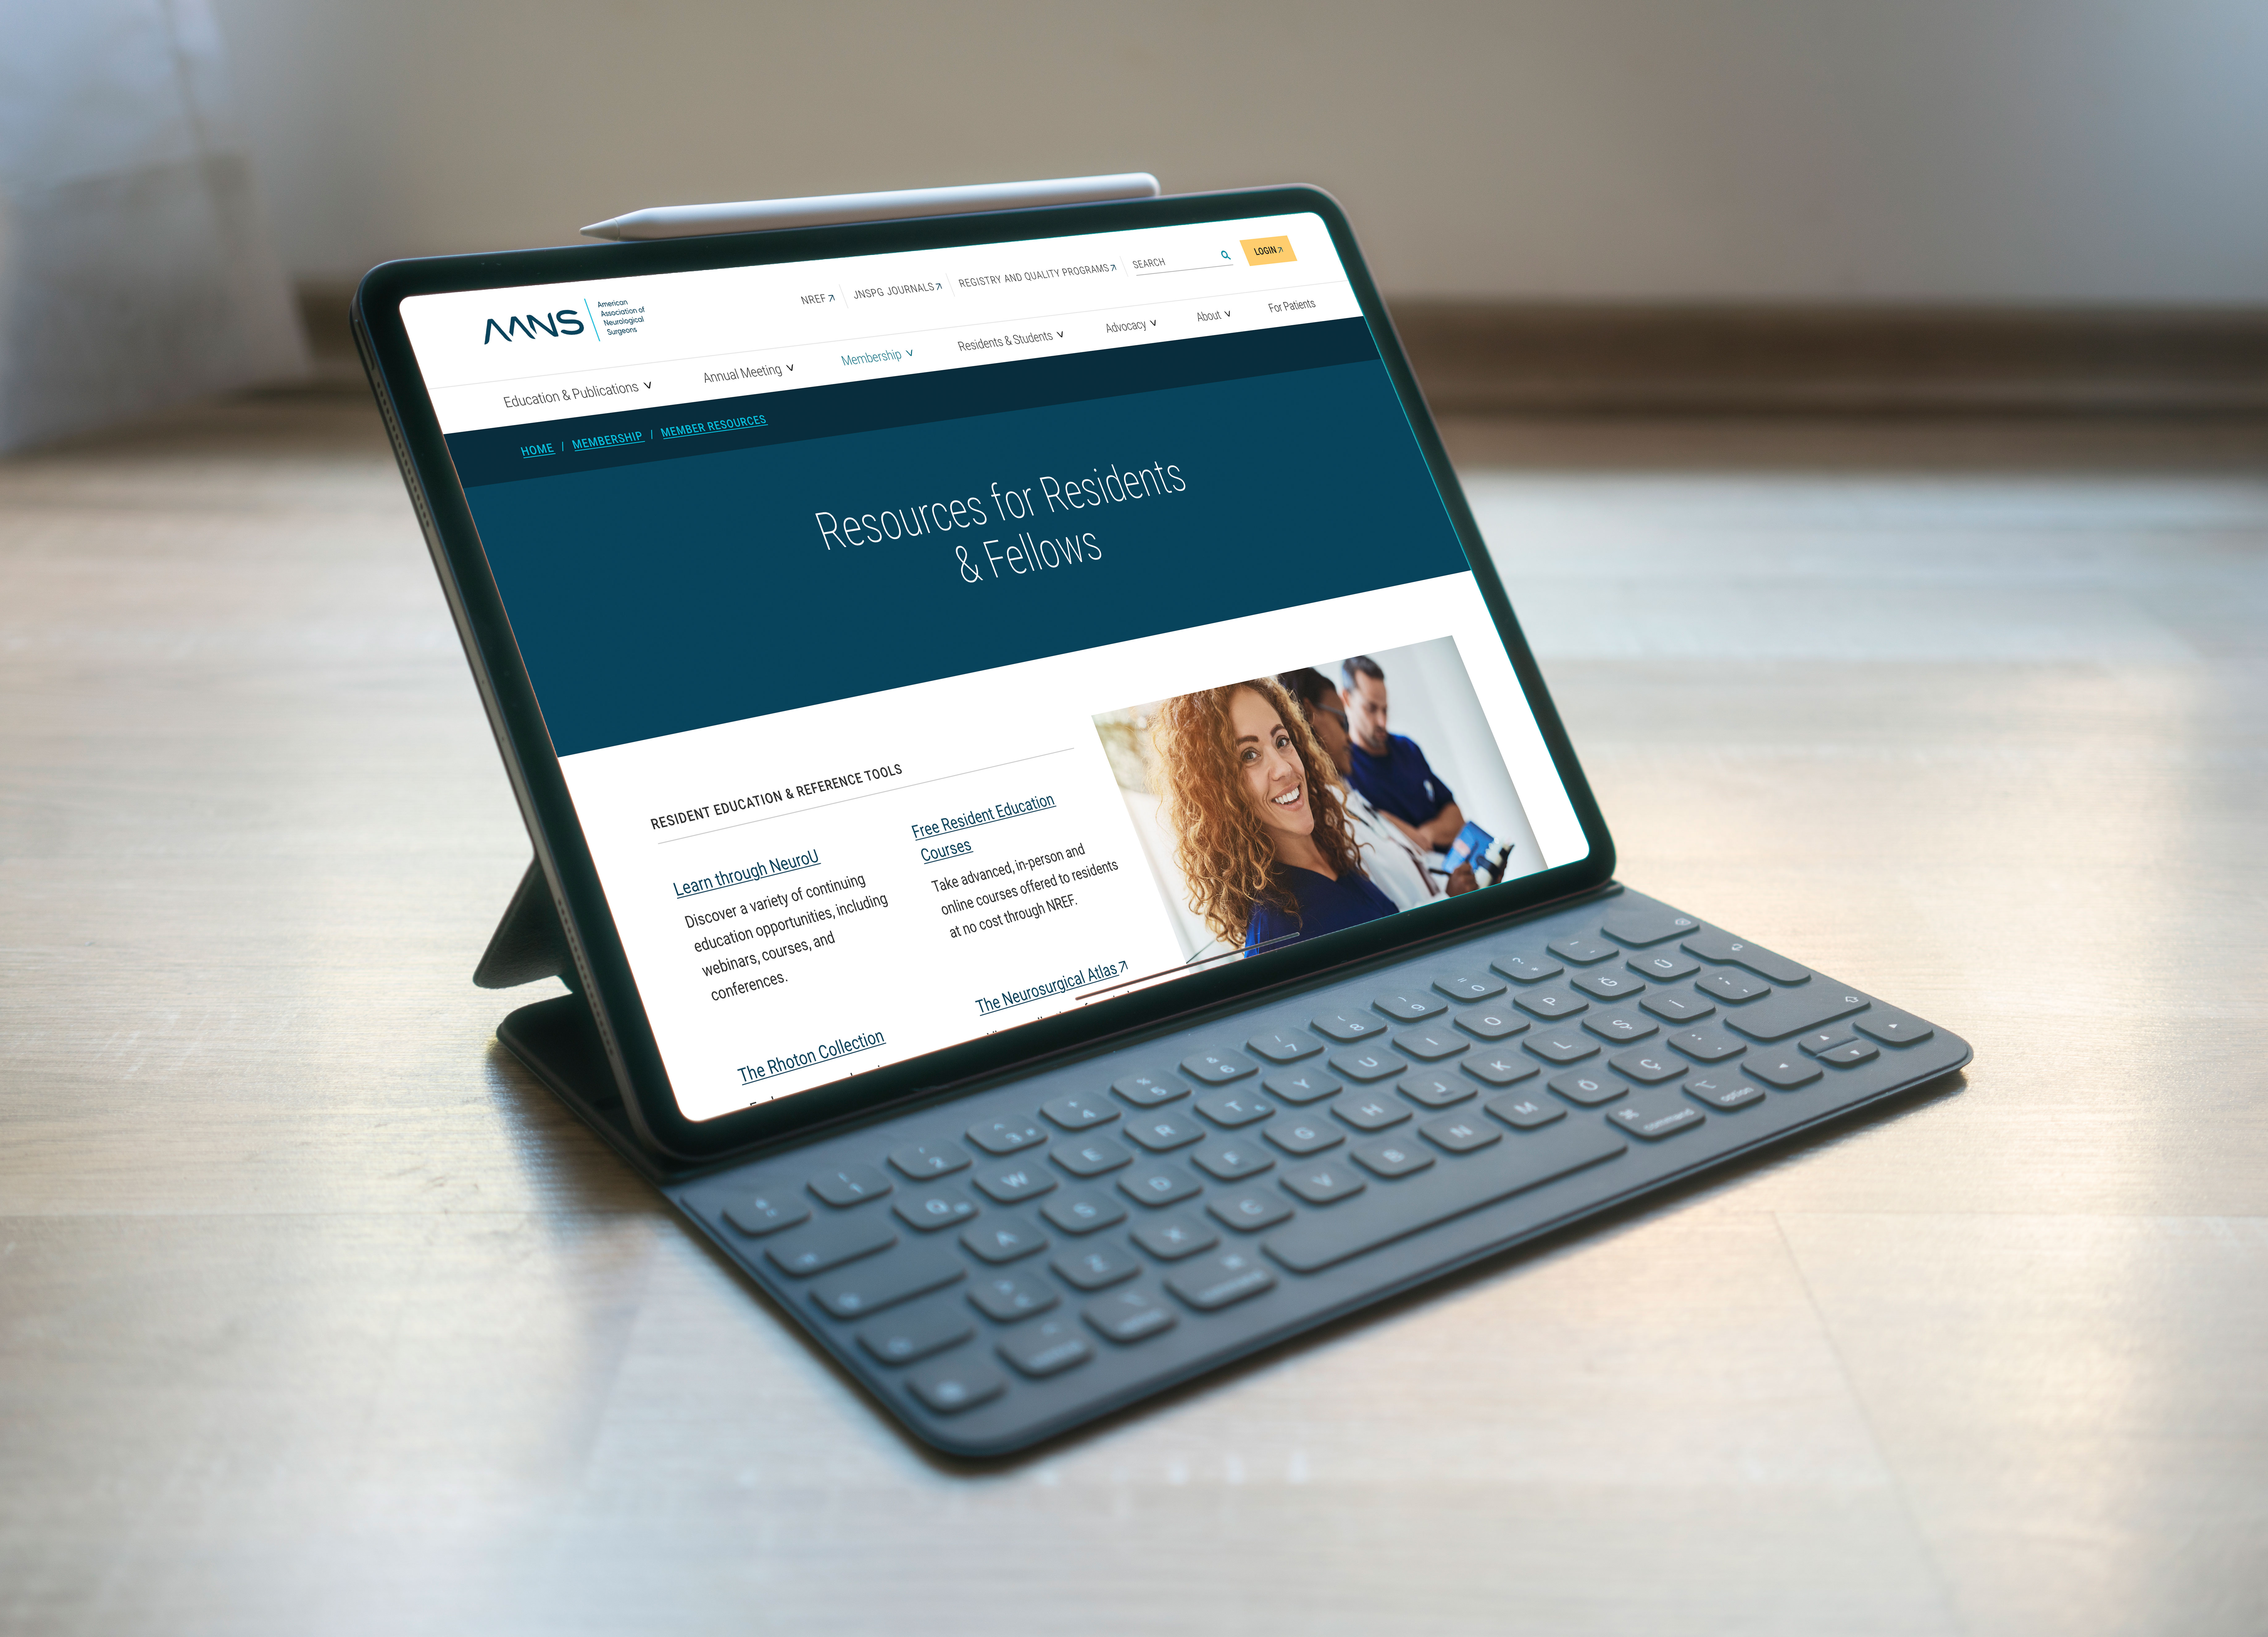 Residents and Students resource page on a tablet